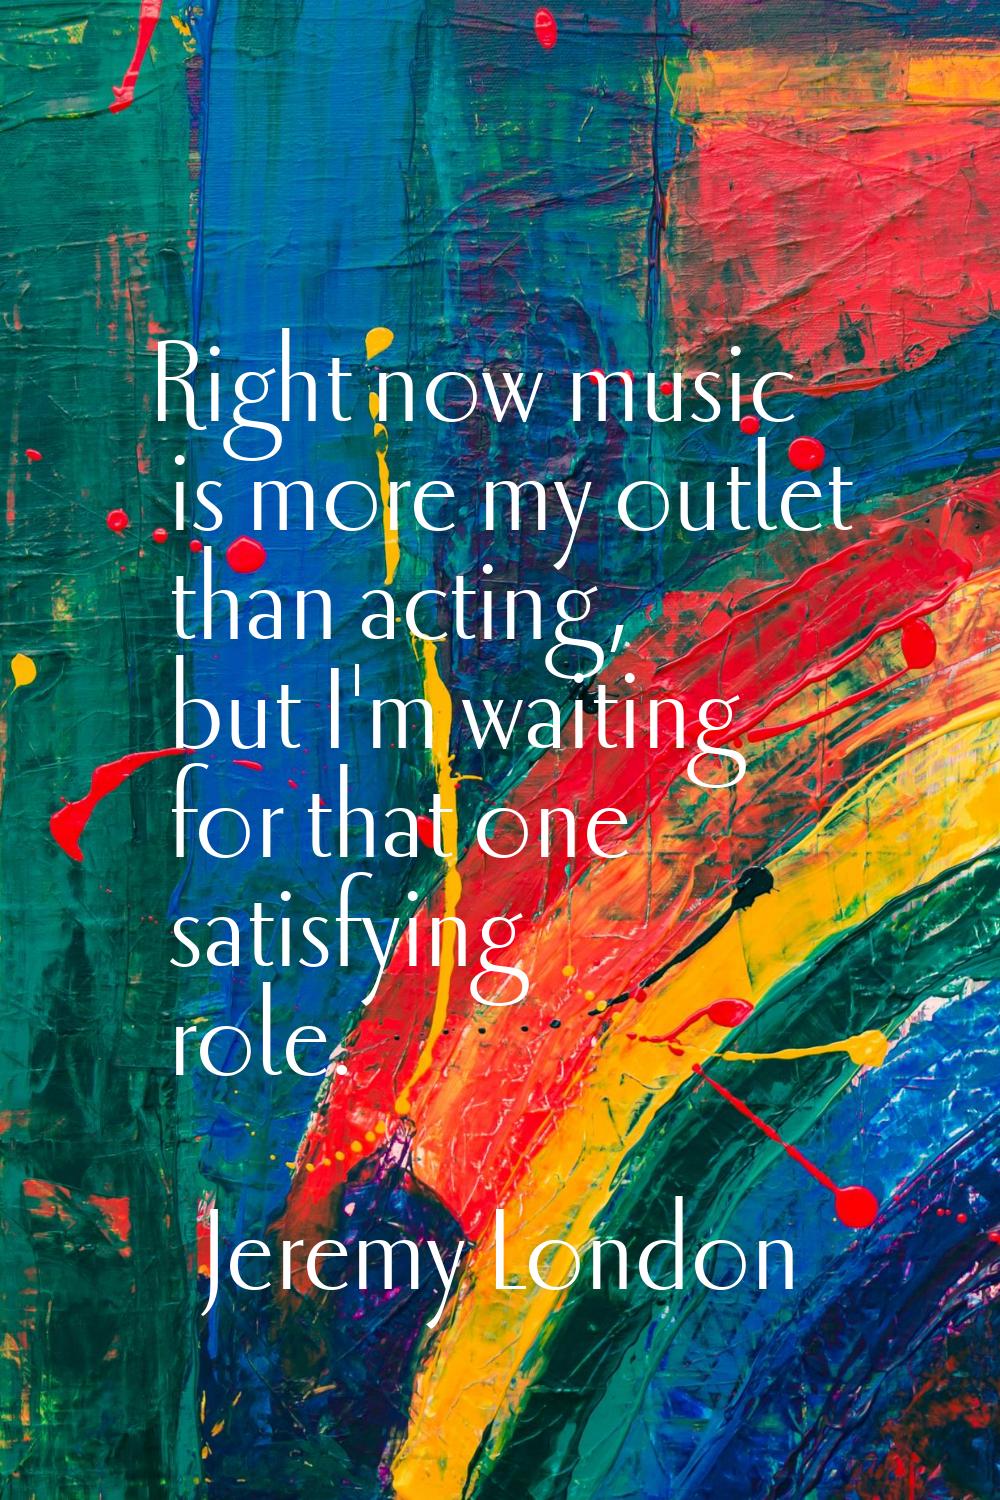 Right now music is more my outlet than acting, but I'm waiting for that one satisfying role.